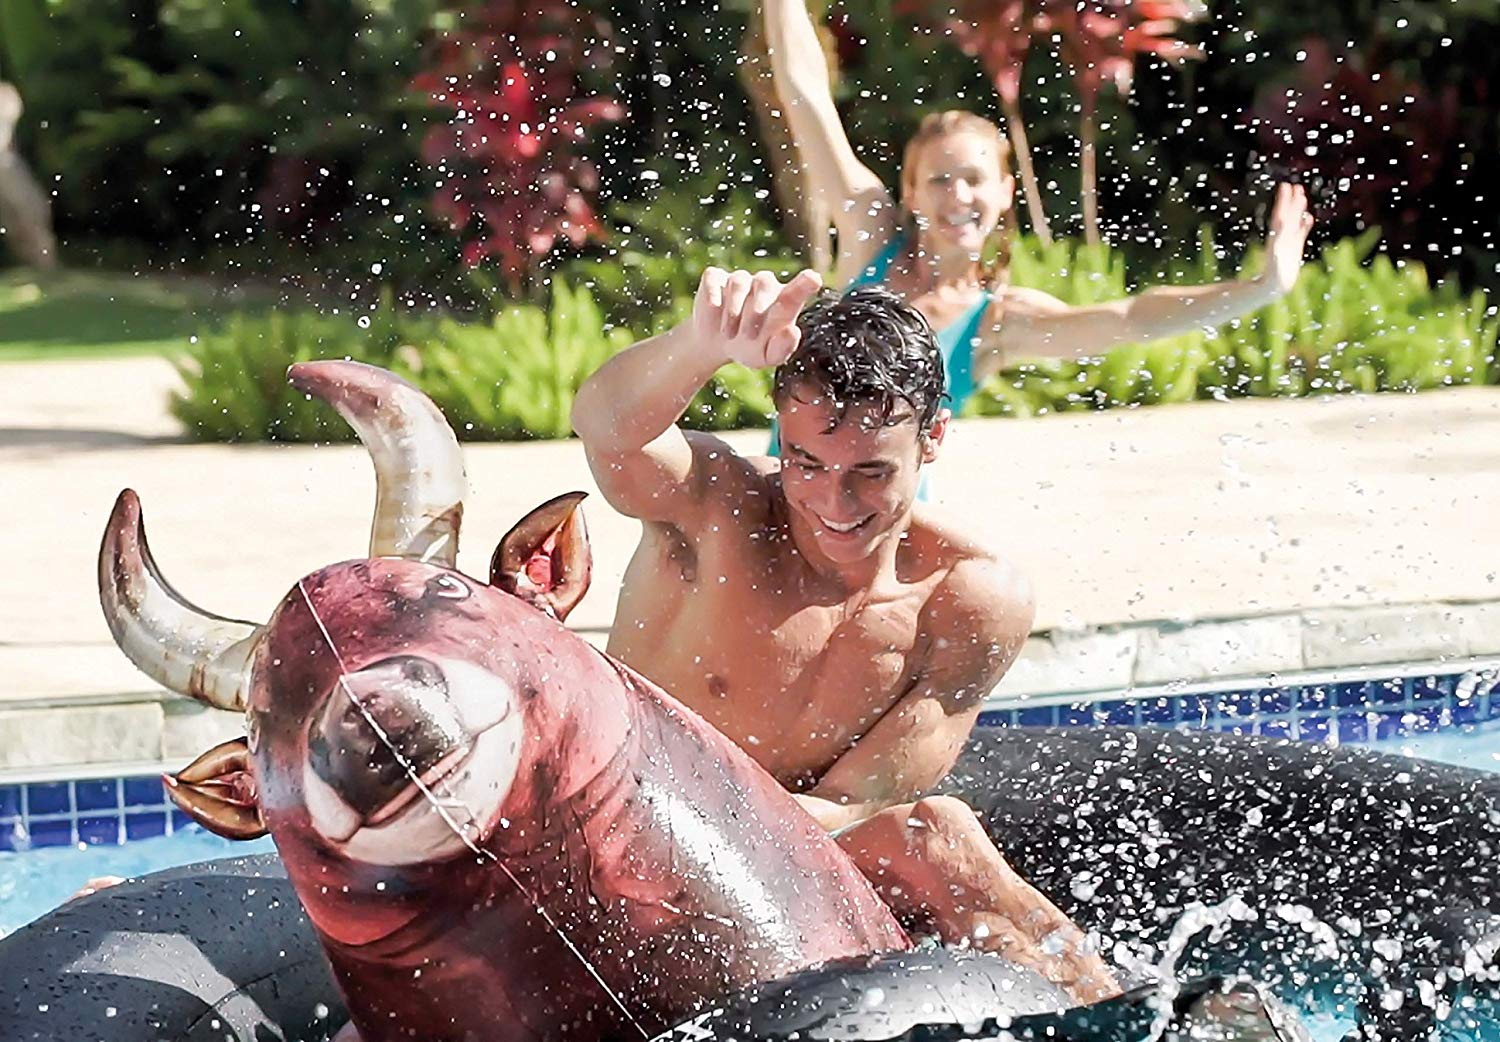 This Giant Inflatable Bull Float Brings The Rodeo To The Pool & It’s Amazing